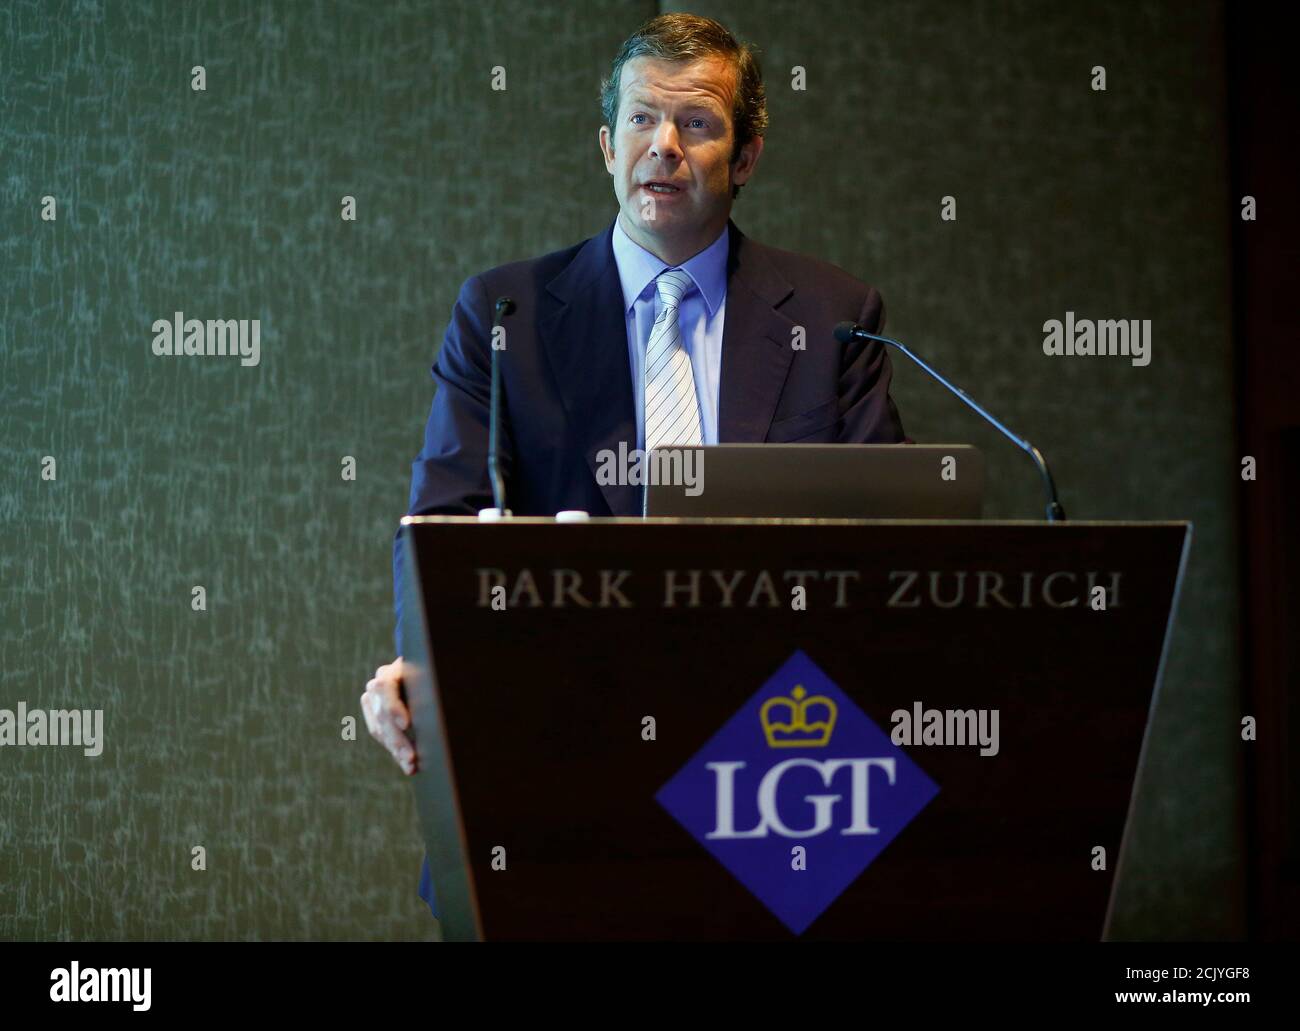 Prince Max von und zu Liechtenstein, CEO of Liechtenstein's LGT group addresses the annual news conference in Zurich March 23, 2015. Net profits at LGT, Liechtenstein's biggest bank, rose more than 18 percent last year, the bank reported on Monday, after it attracted fresh funds and acquired a large portfolio of accounts from HSBC's private bank. The Vaduz-based lender, owned by the principality's royal family, said last year it was buying from HSBC $12.5 billion of private banking assets that the British bank wanted to offload to reduce the size of its wealth management arm.   REUTERS/Arnd Wi Stock Photo